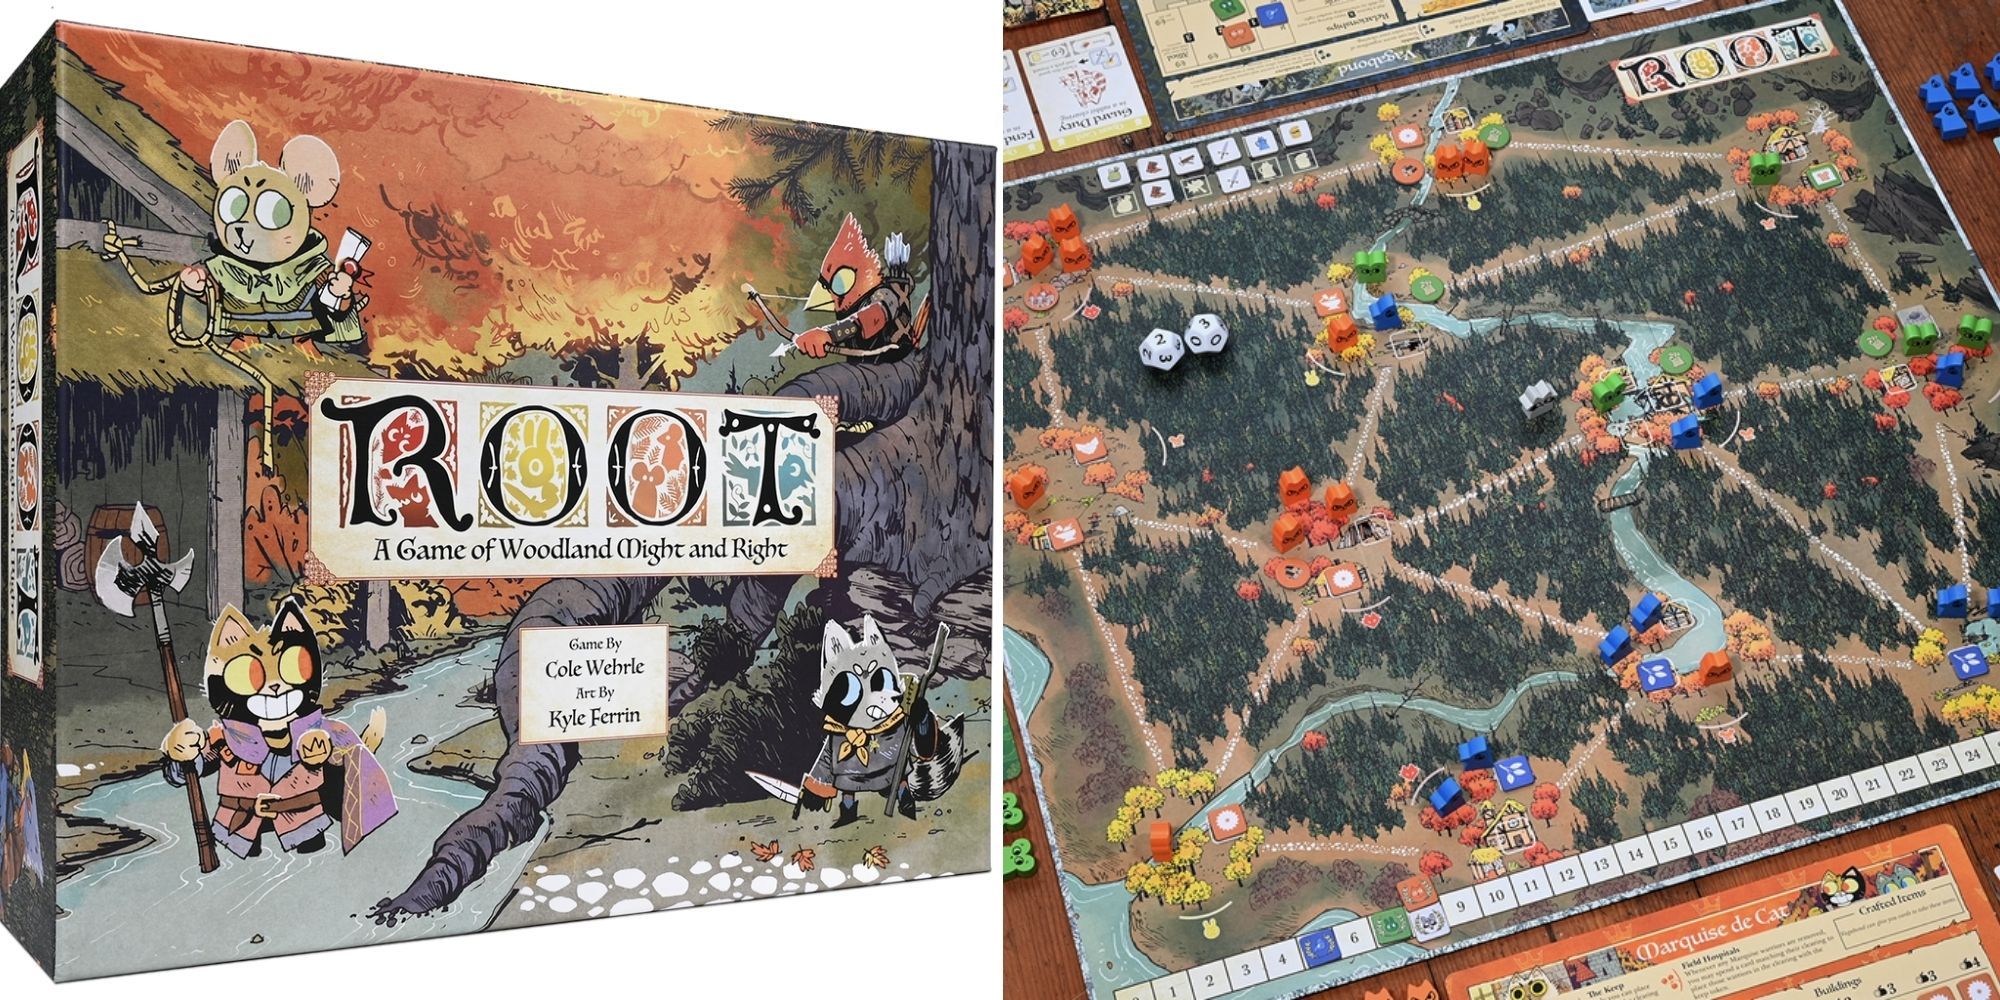 Root - Board Game Box - The game set up with animals on the board